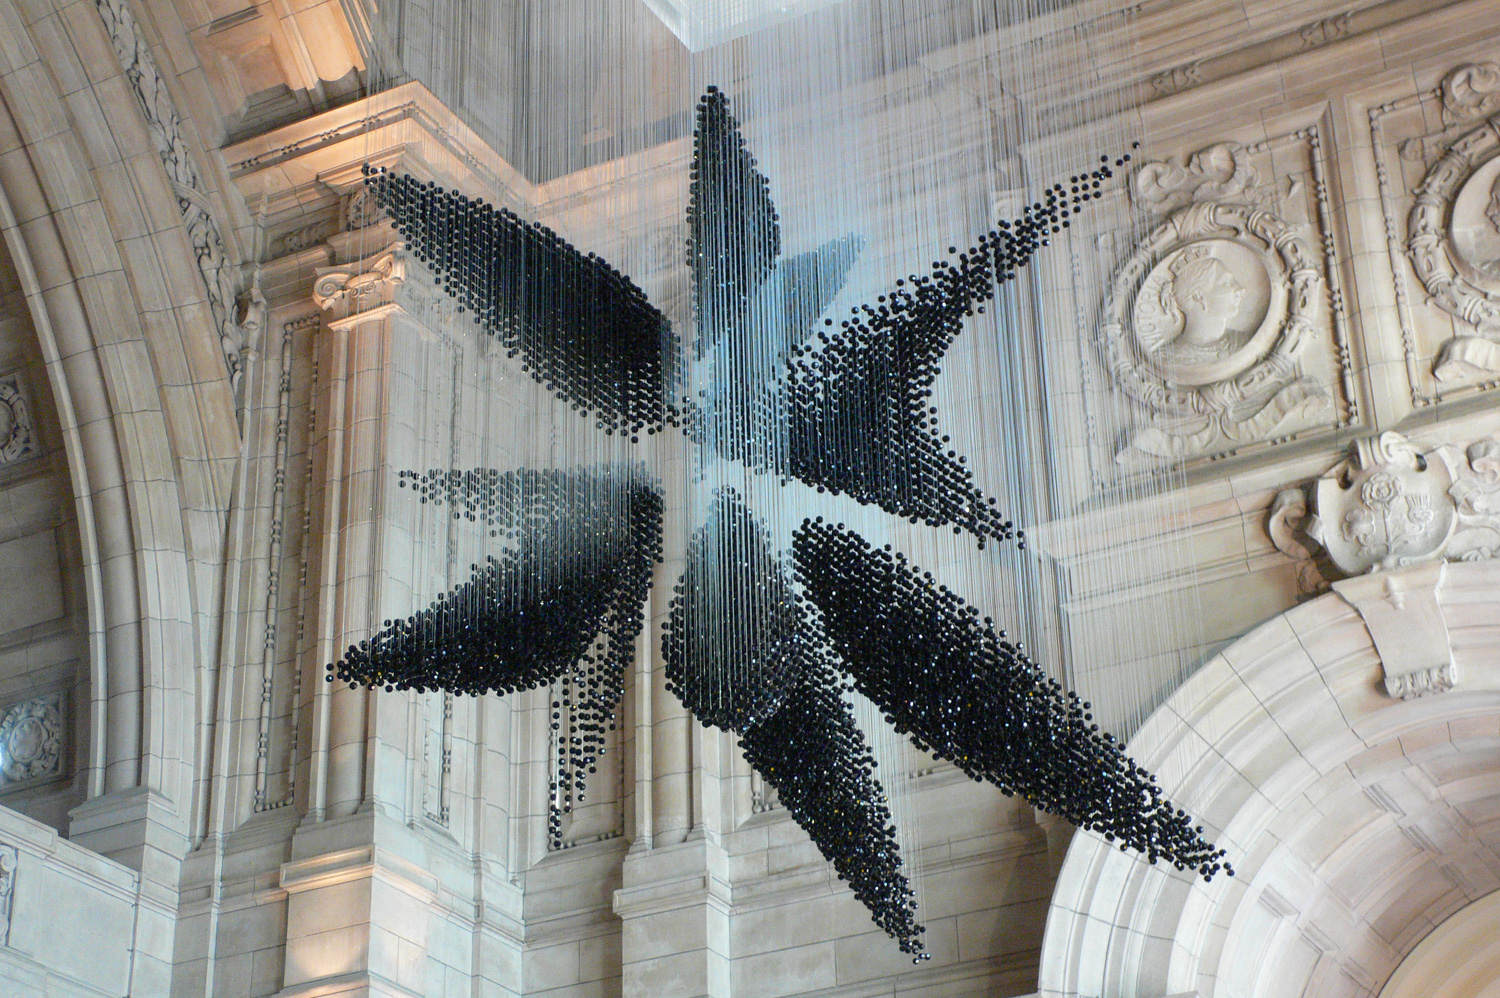 Swarm chandelier at the V & A museum London